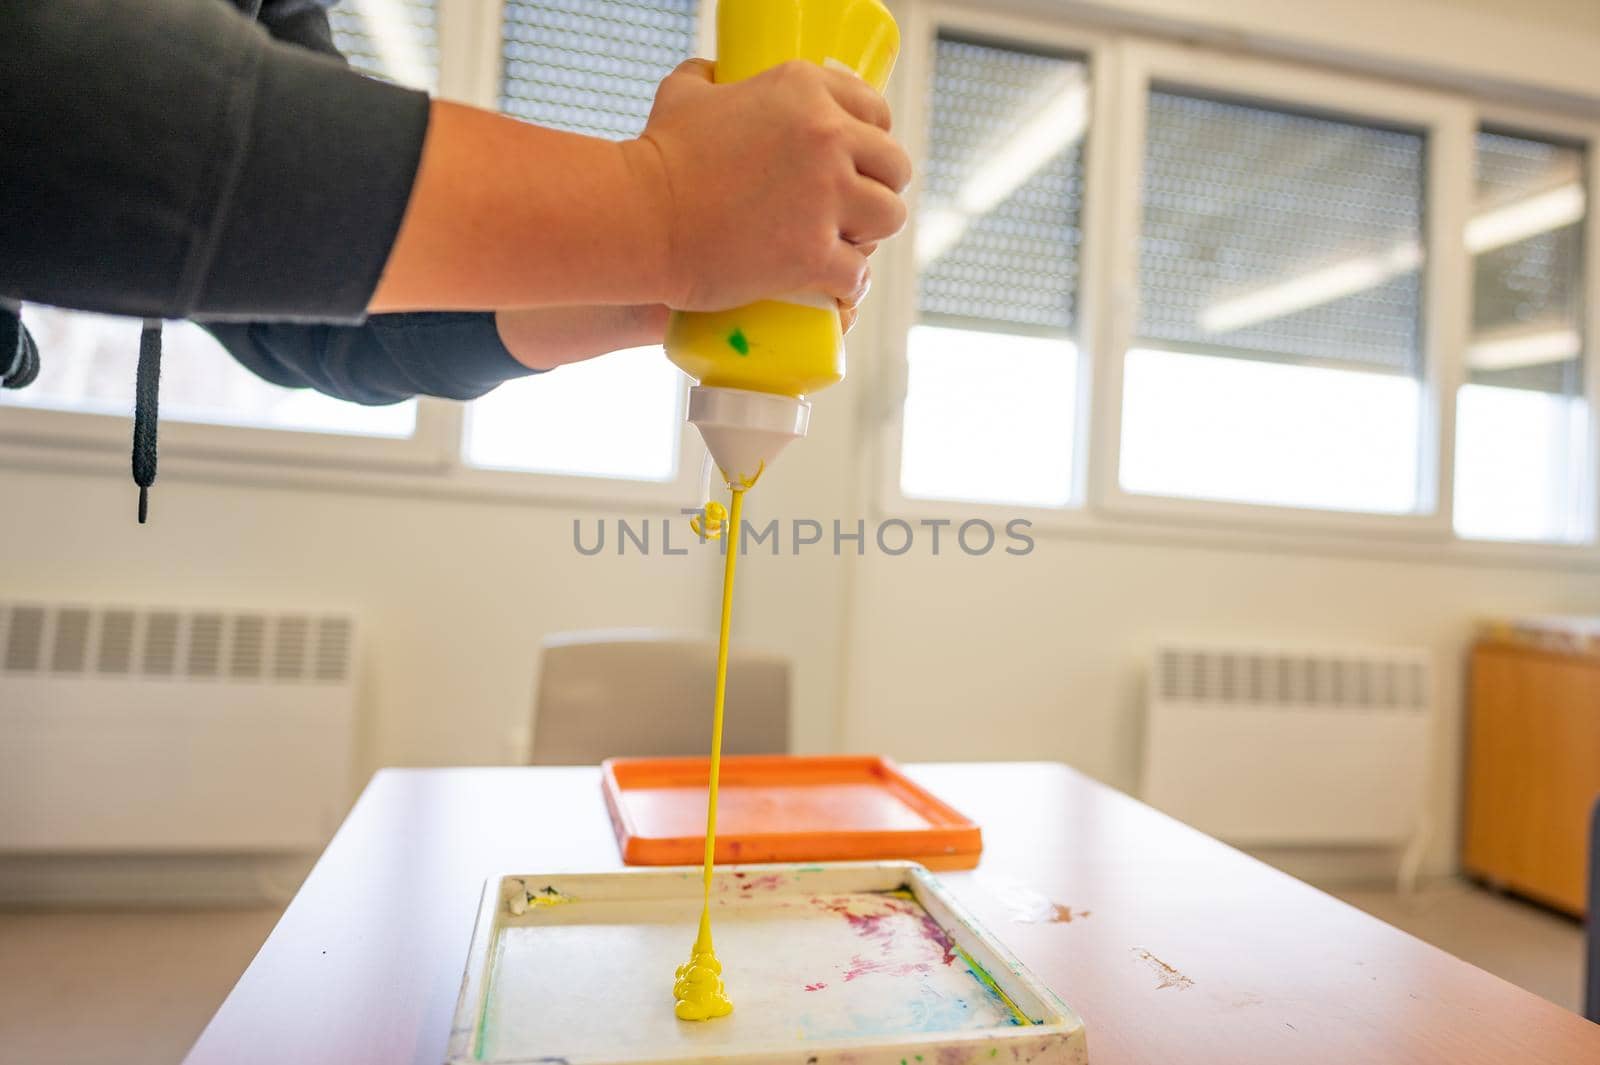 Worker squeezing yellow paint from tube into tray to prepare it for painting